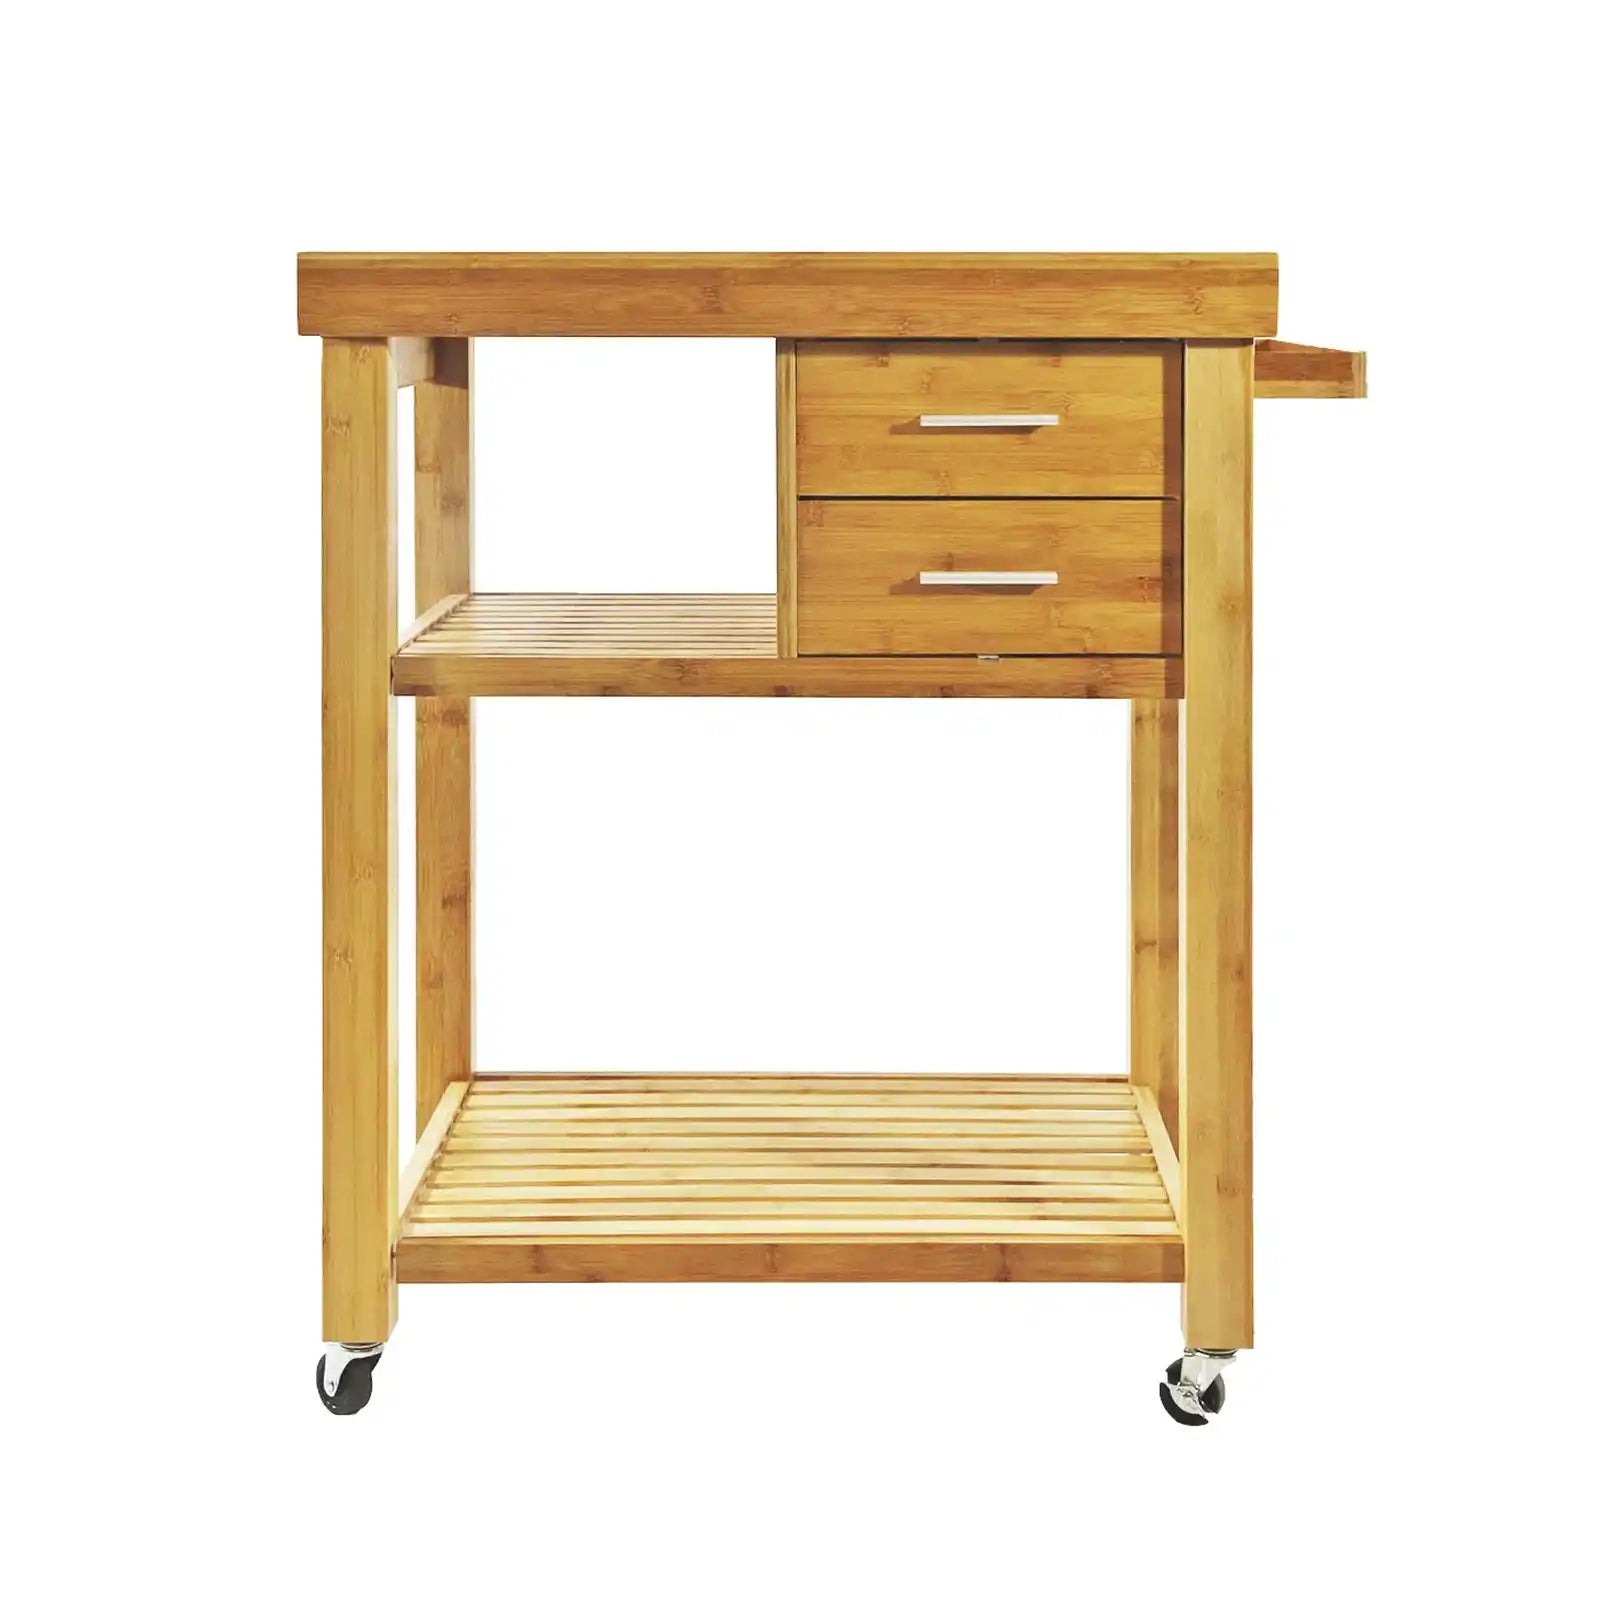 Rolling Bamboo Wood Kitchen Island Cart Trolley on Wheels with Drawers Shelves